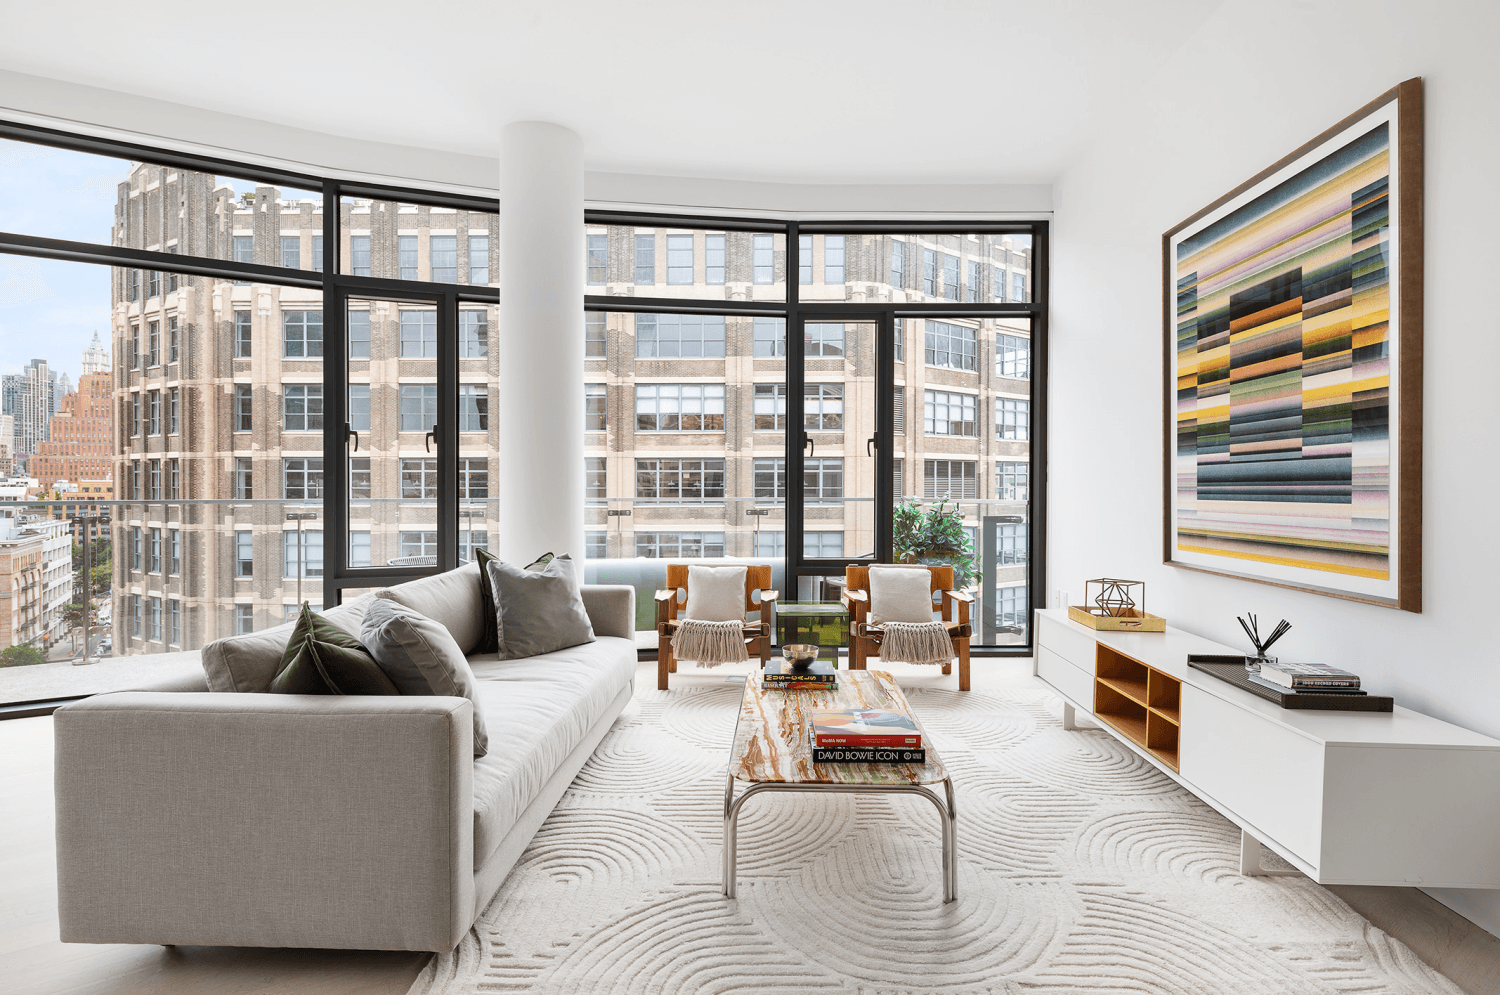 Immediate Occupancy. For a limited time, offering one year of tax and common charges for full ask contracts, for penthouse homes only at Everly.